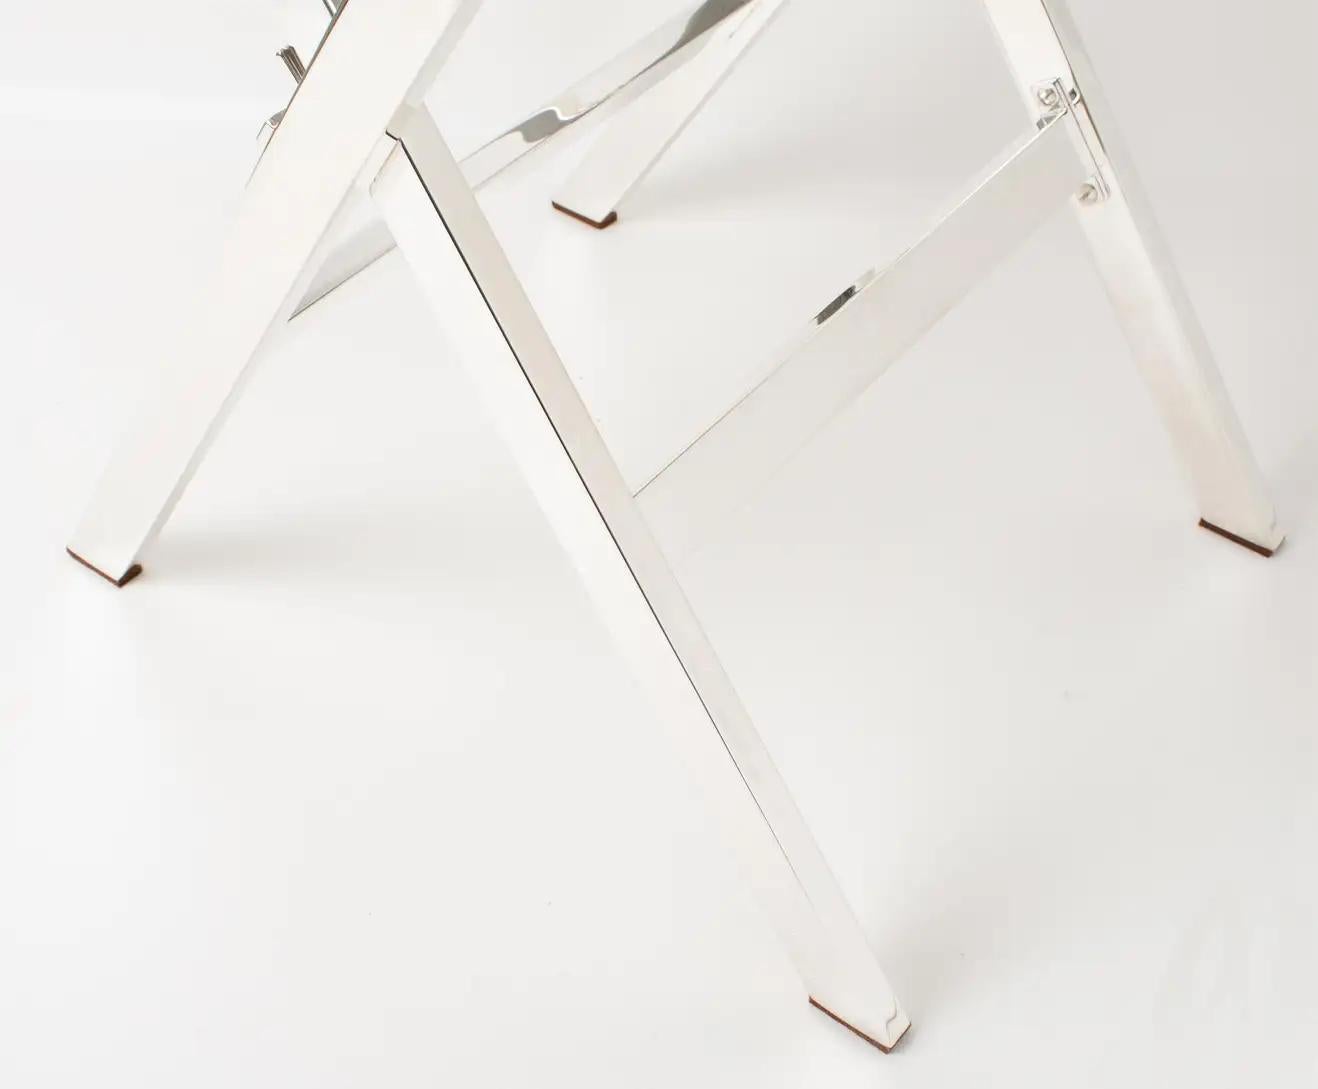 Christian Dior Folding Tray Table Tortoiseshell Lucite and Silver Plate, 1960s For Sale 8